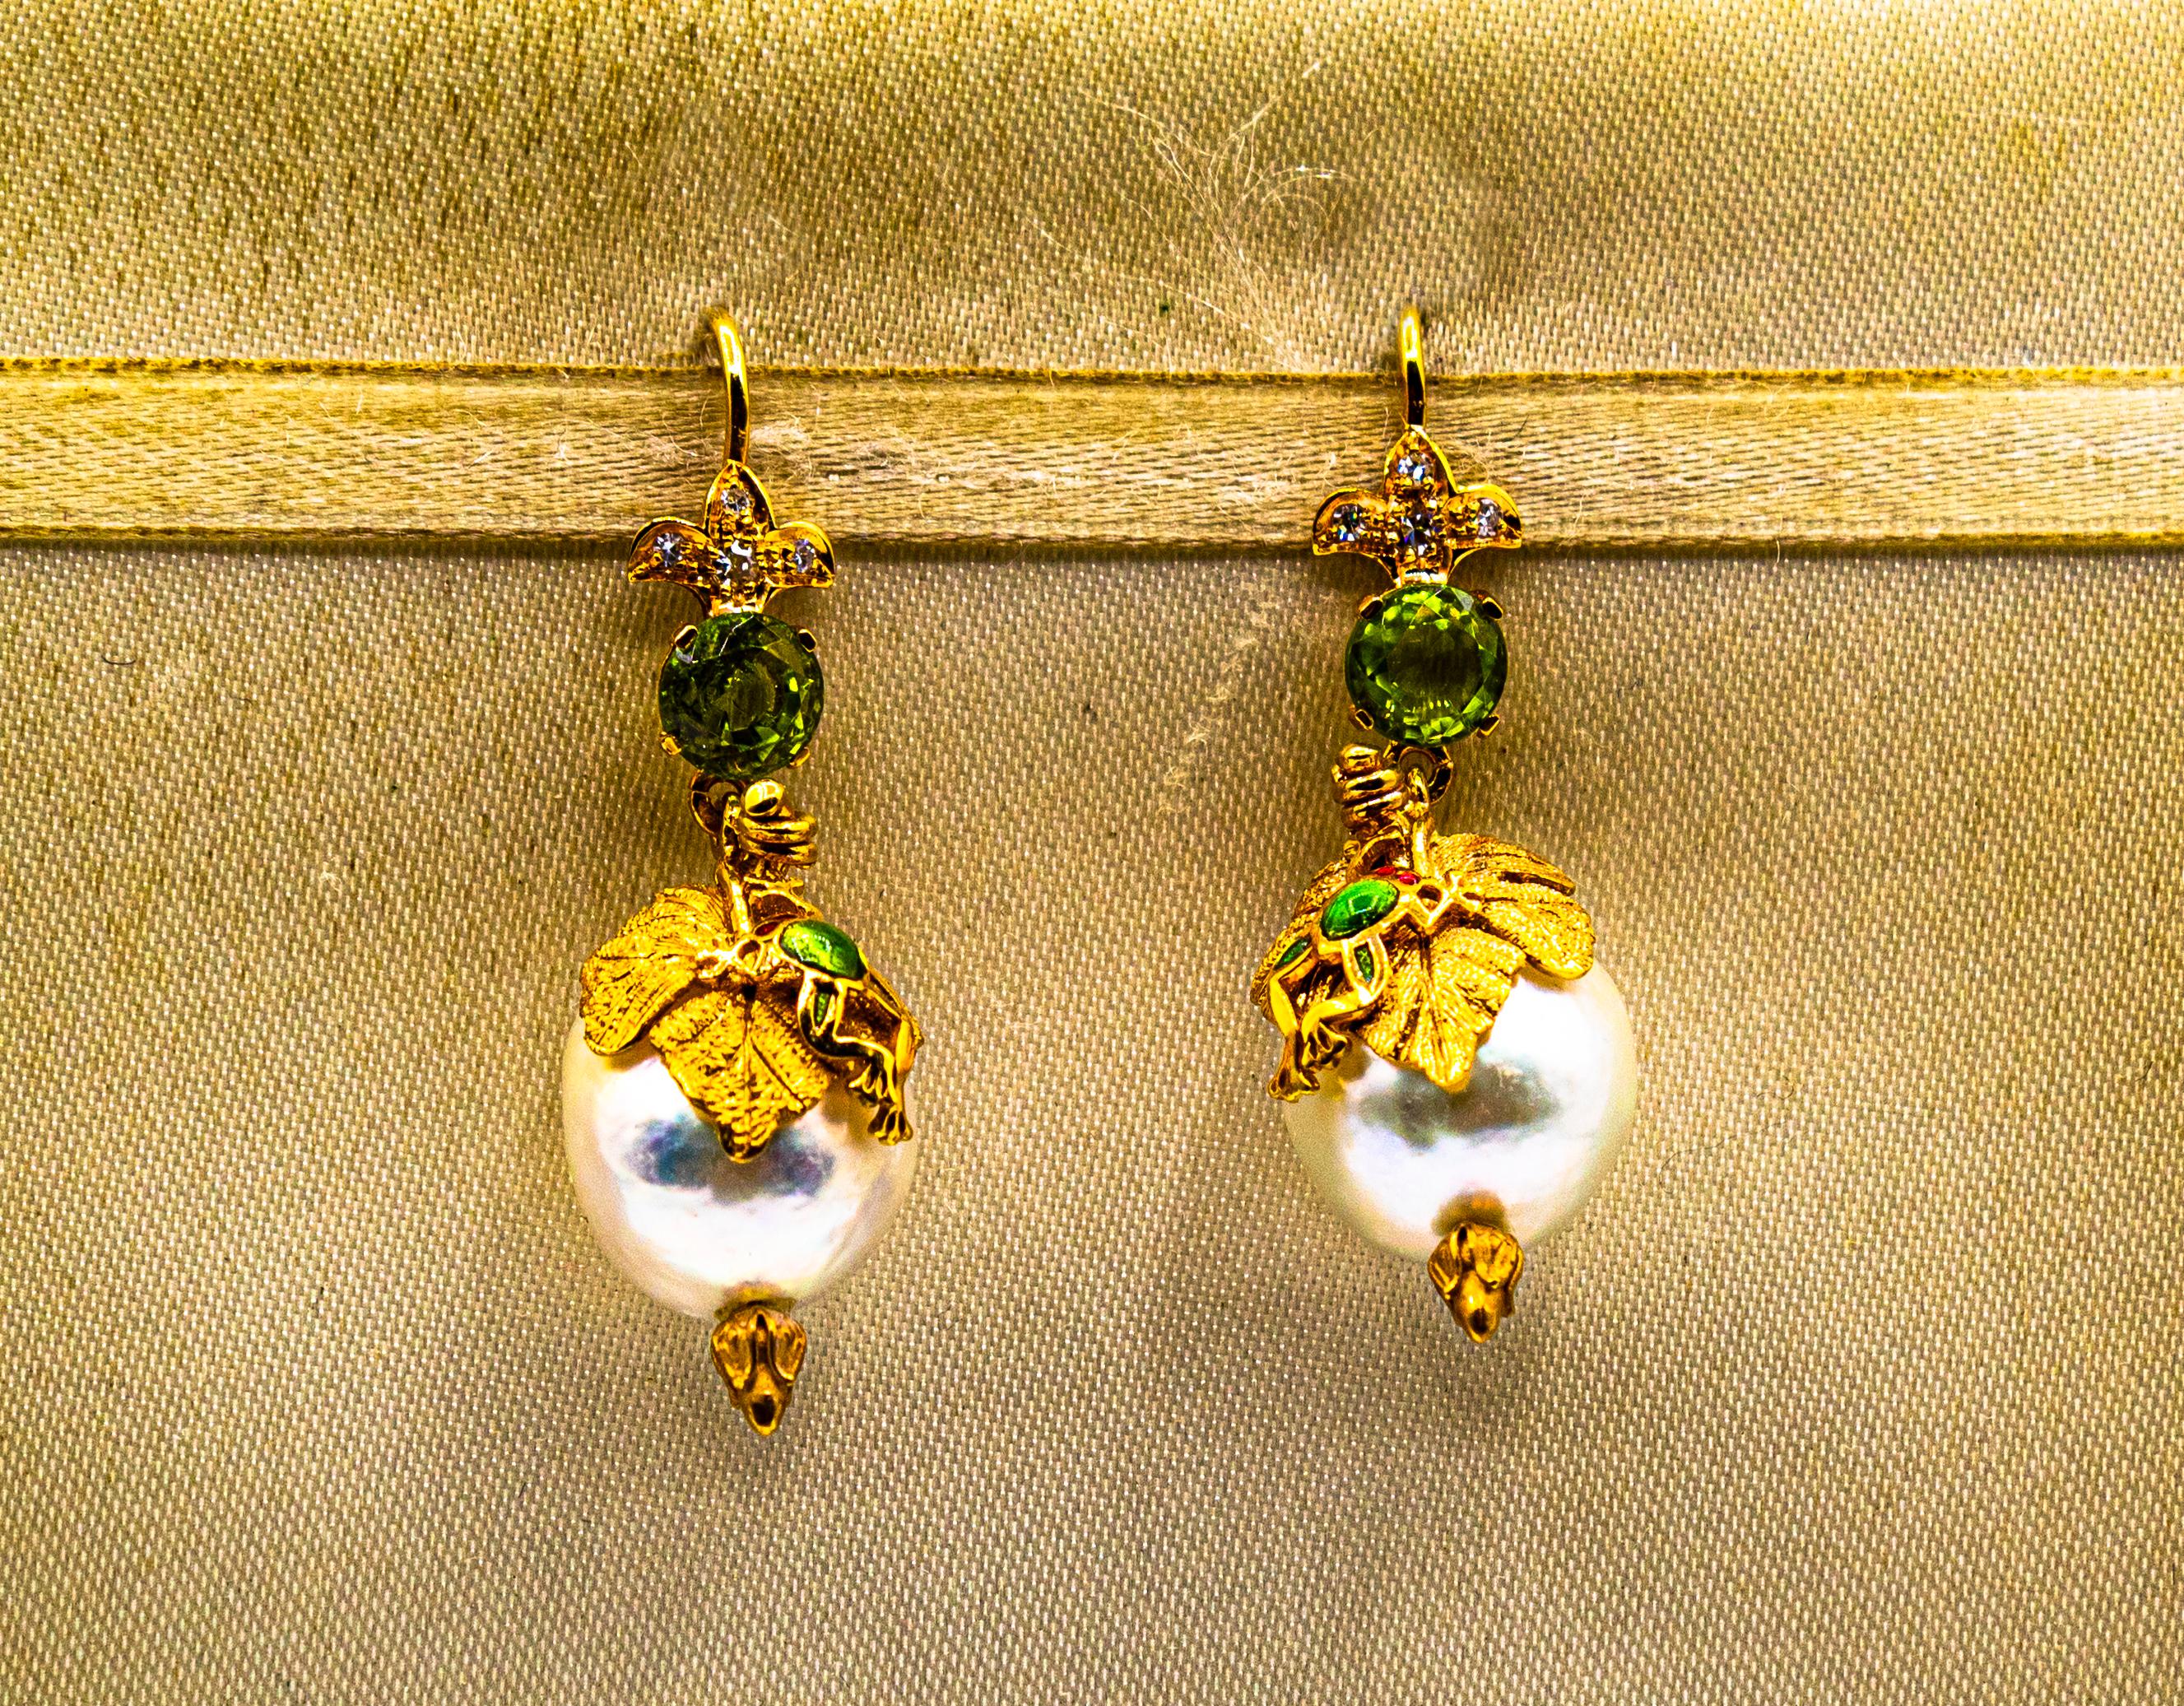 a specialty of greek goldsmiths was the design of earrings in tiny forms of